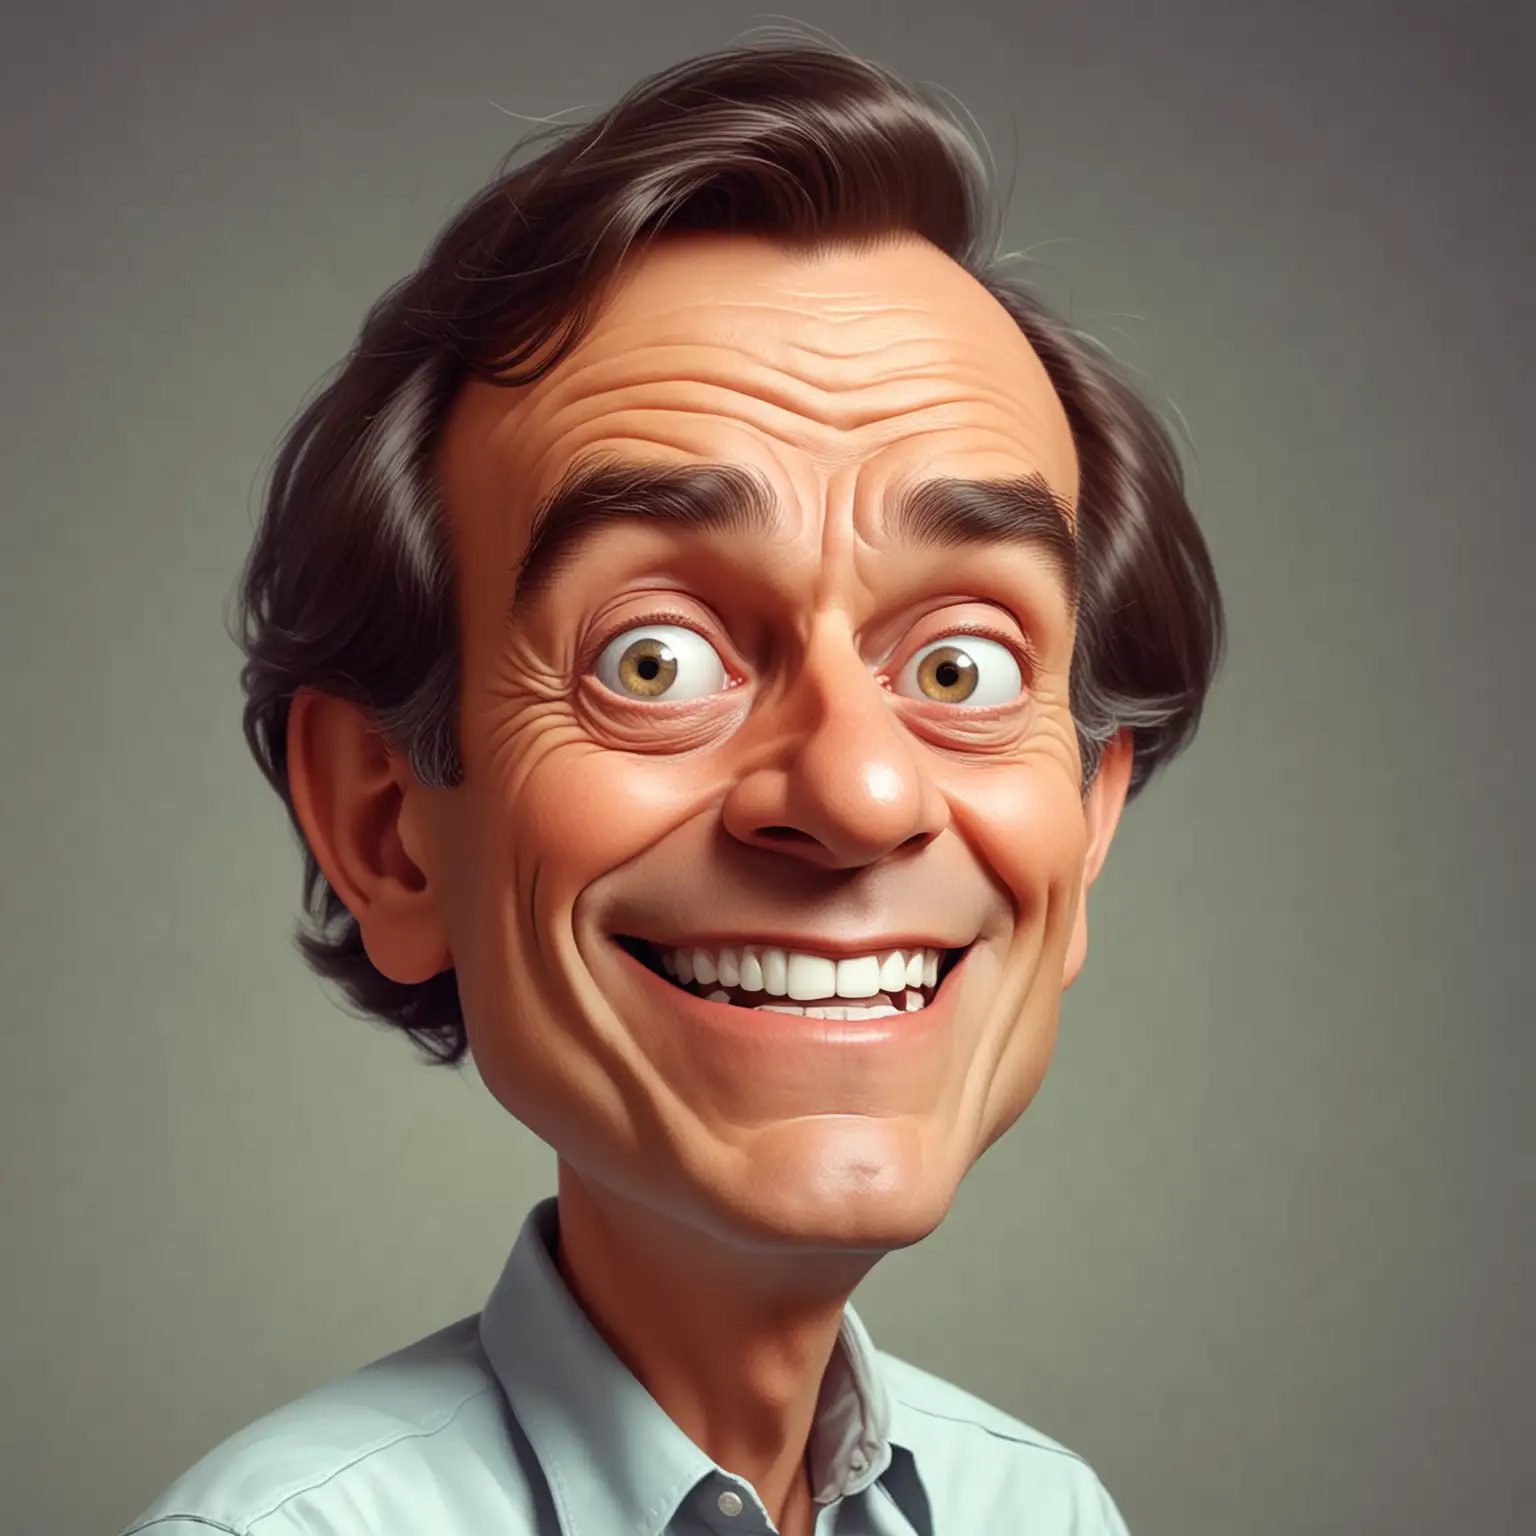 A cartoon caricature of a [Richard Feynman] and making funny faces in the style of Pixar.
